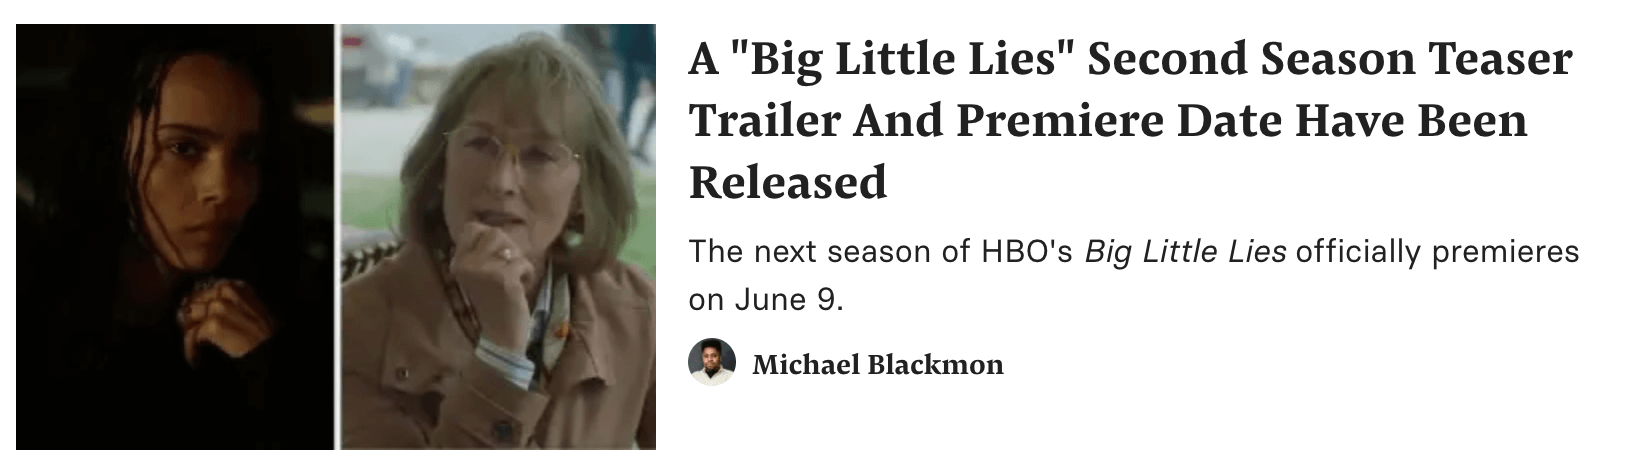 A Buzzfeed article headline about the new trailer and release date for Big Little Lies.